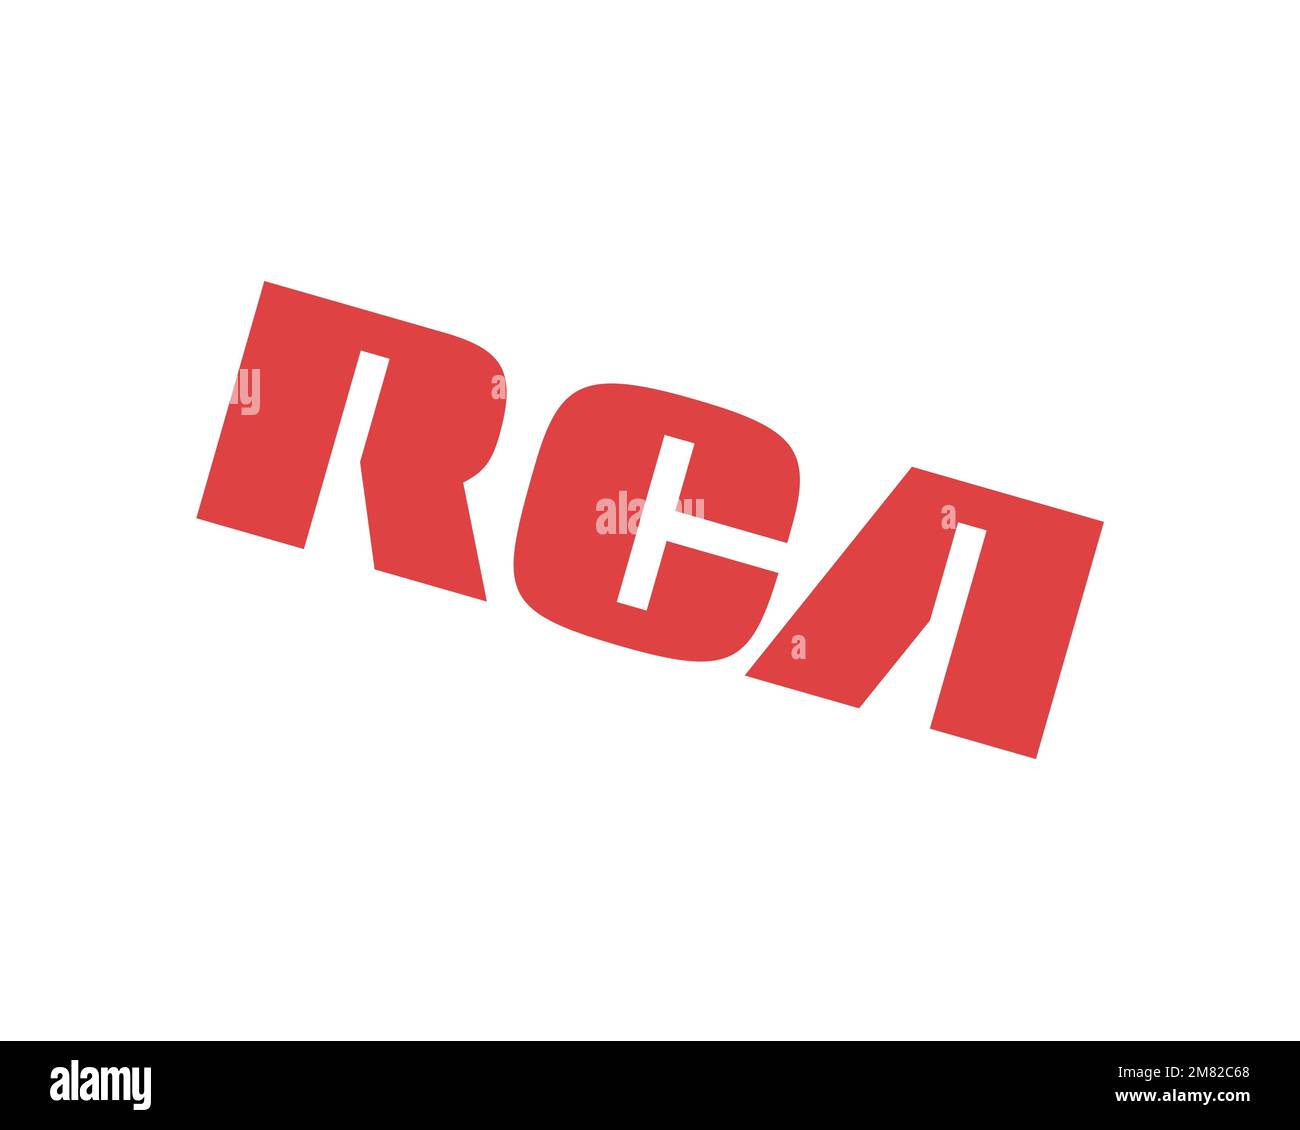 RCA Logo and symbol, meaning, history, PNG, brand